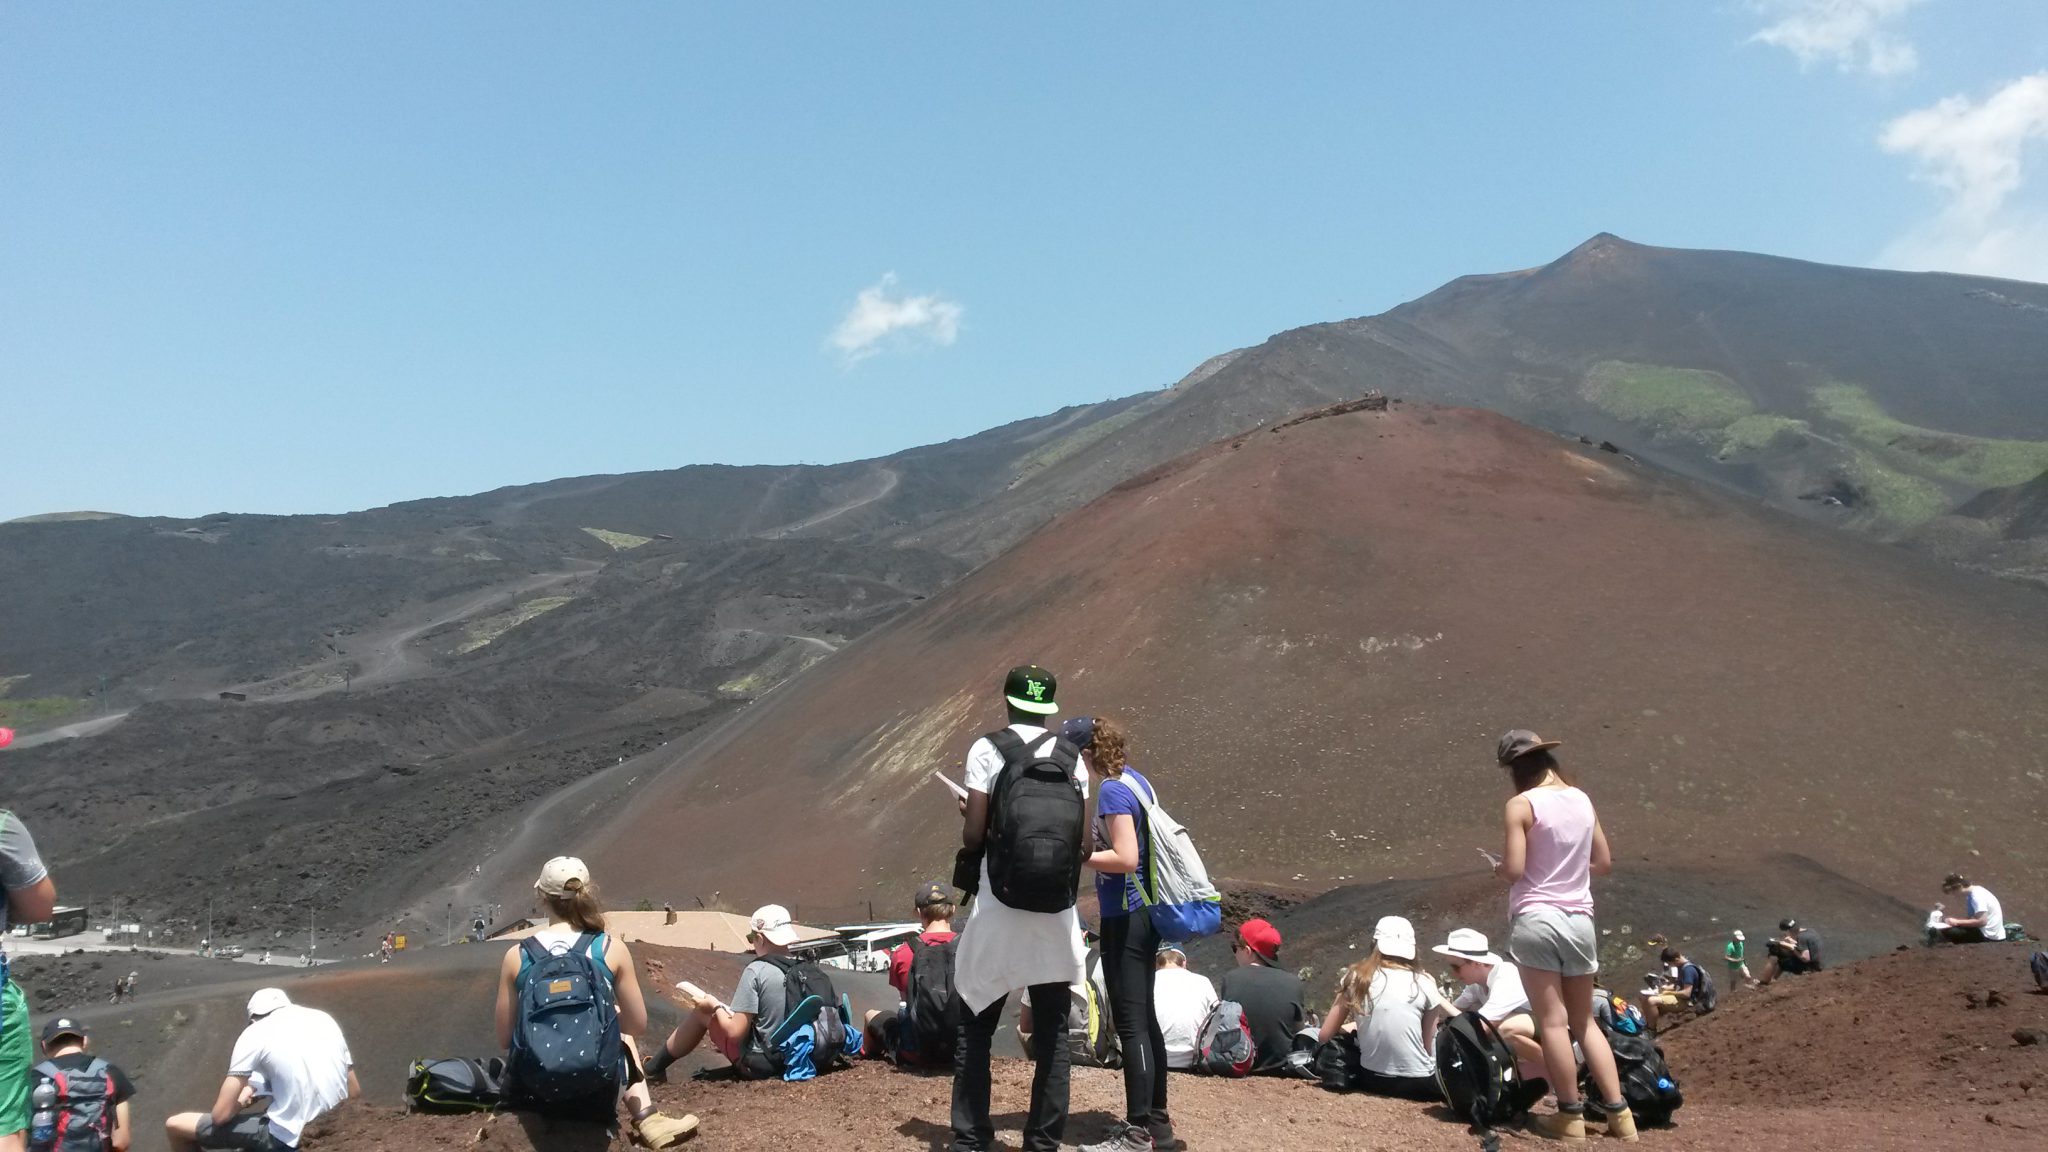 Pupils field sketching from Silvestri Inferiore looking up to Mt Etna